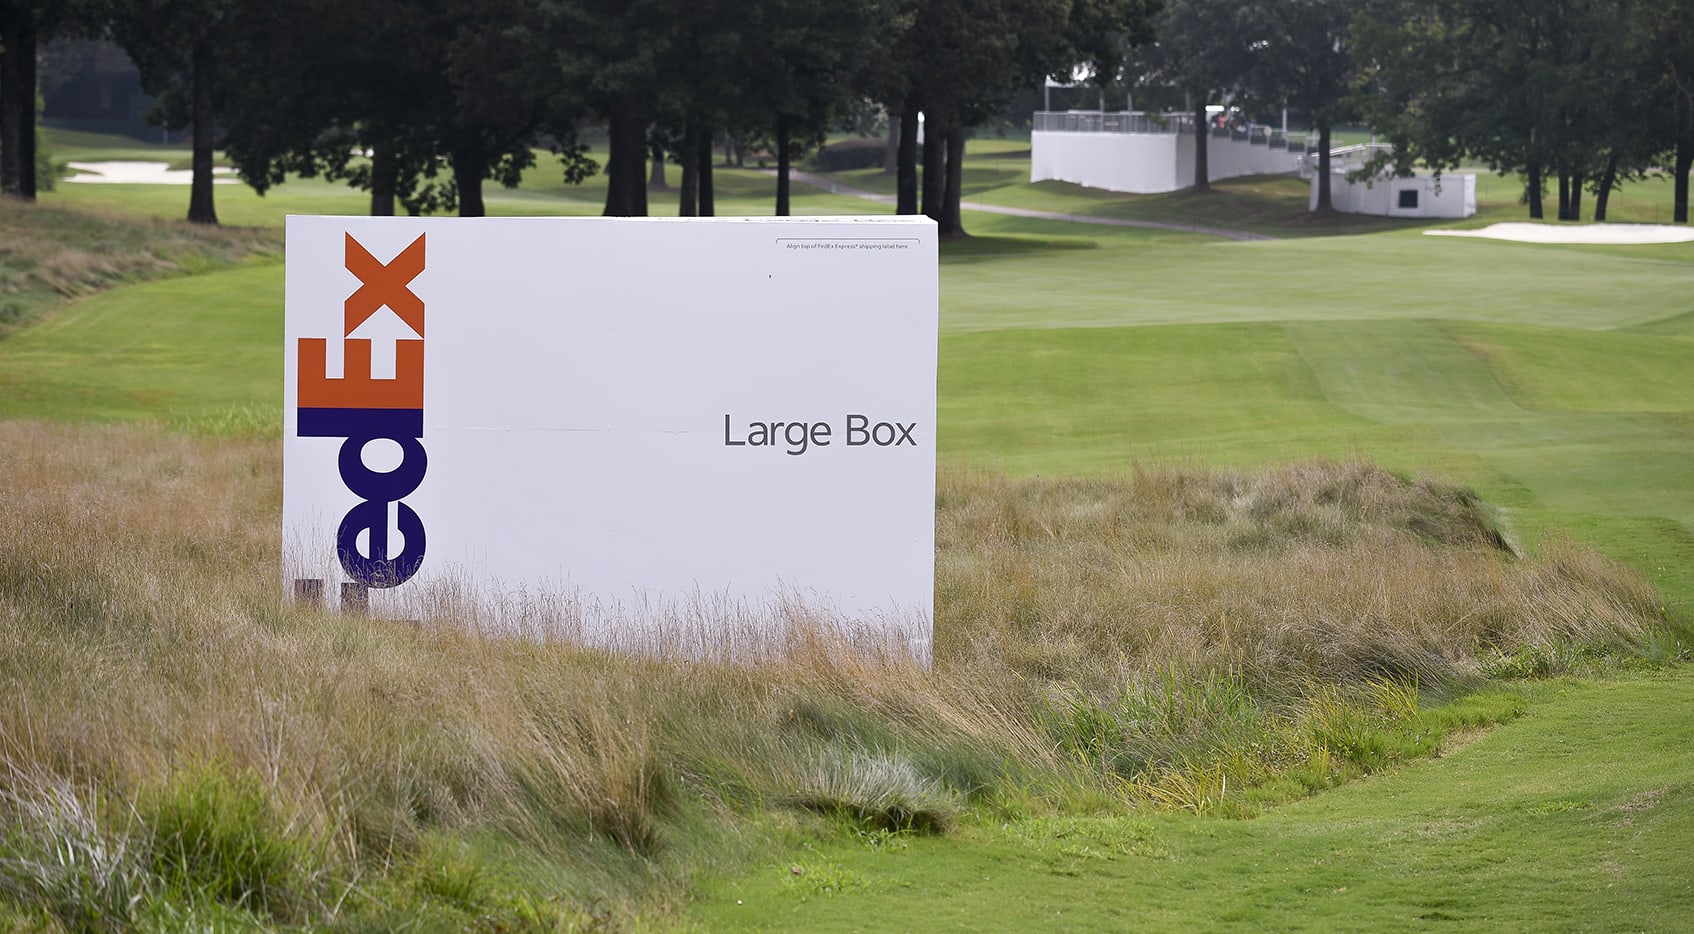 How to watch the WGC-FedEx St